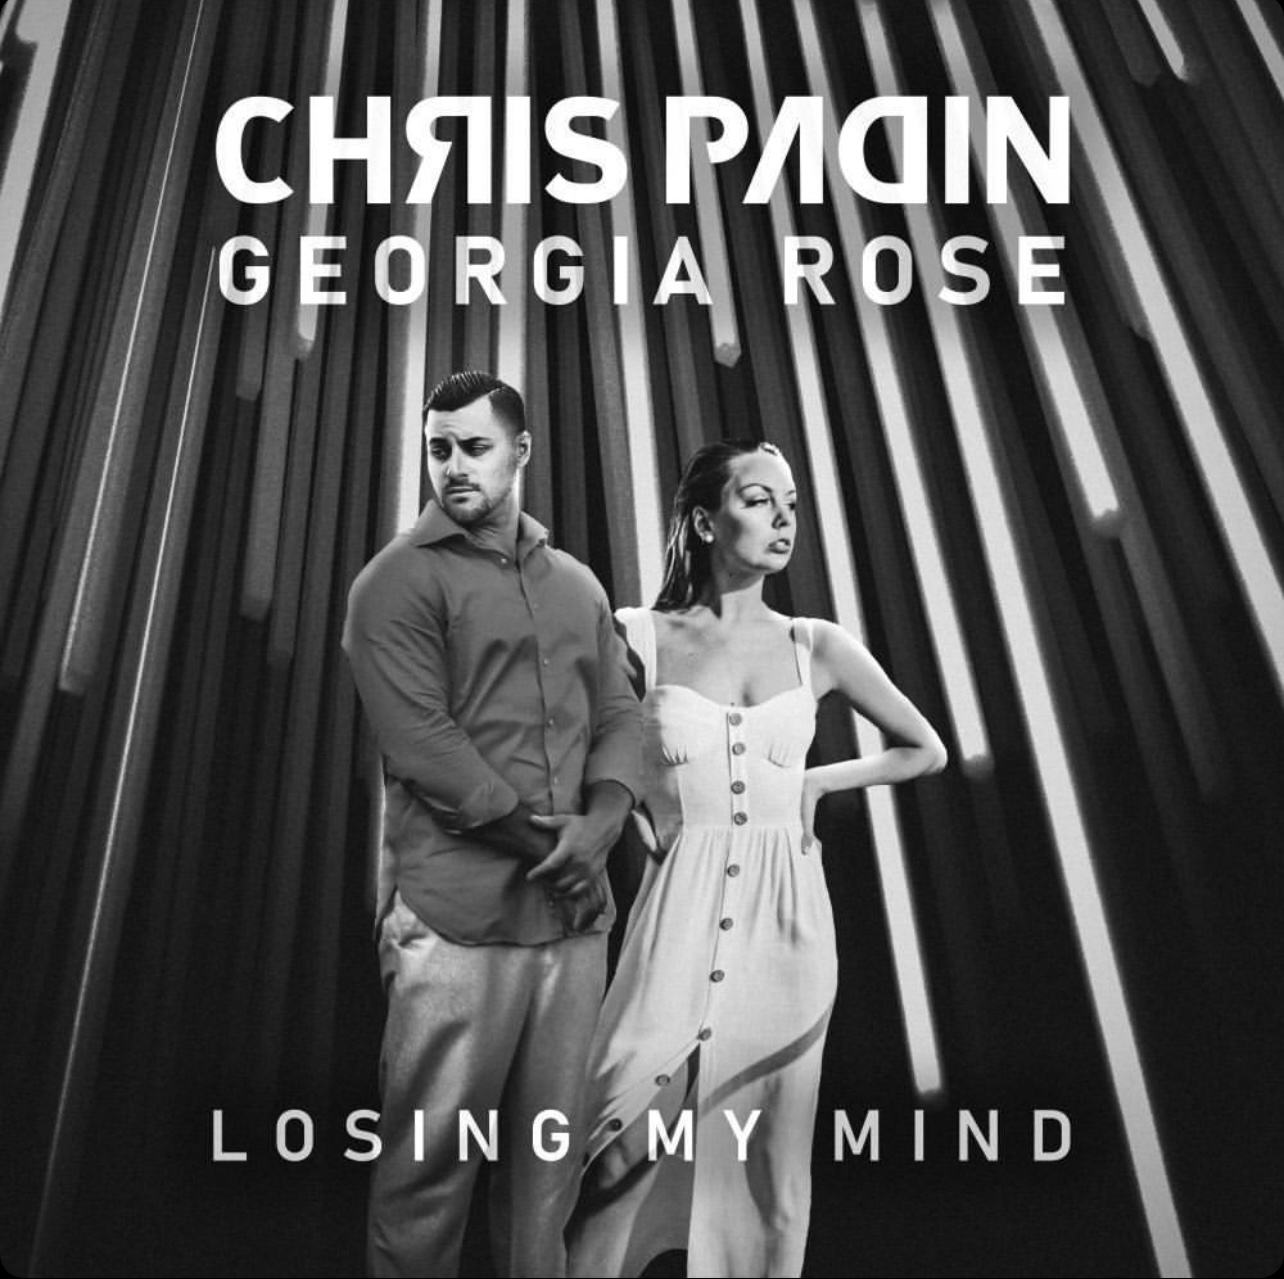 ‘Chris Padin’ first heard Georgia Rose’s vocals on Bravo’s hit show Below Deck“, check out their amazing collaboration ‘Losing My Mind’